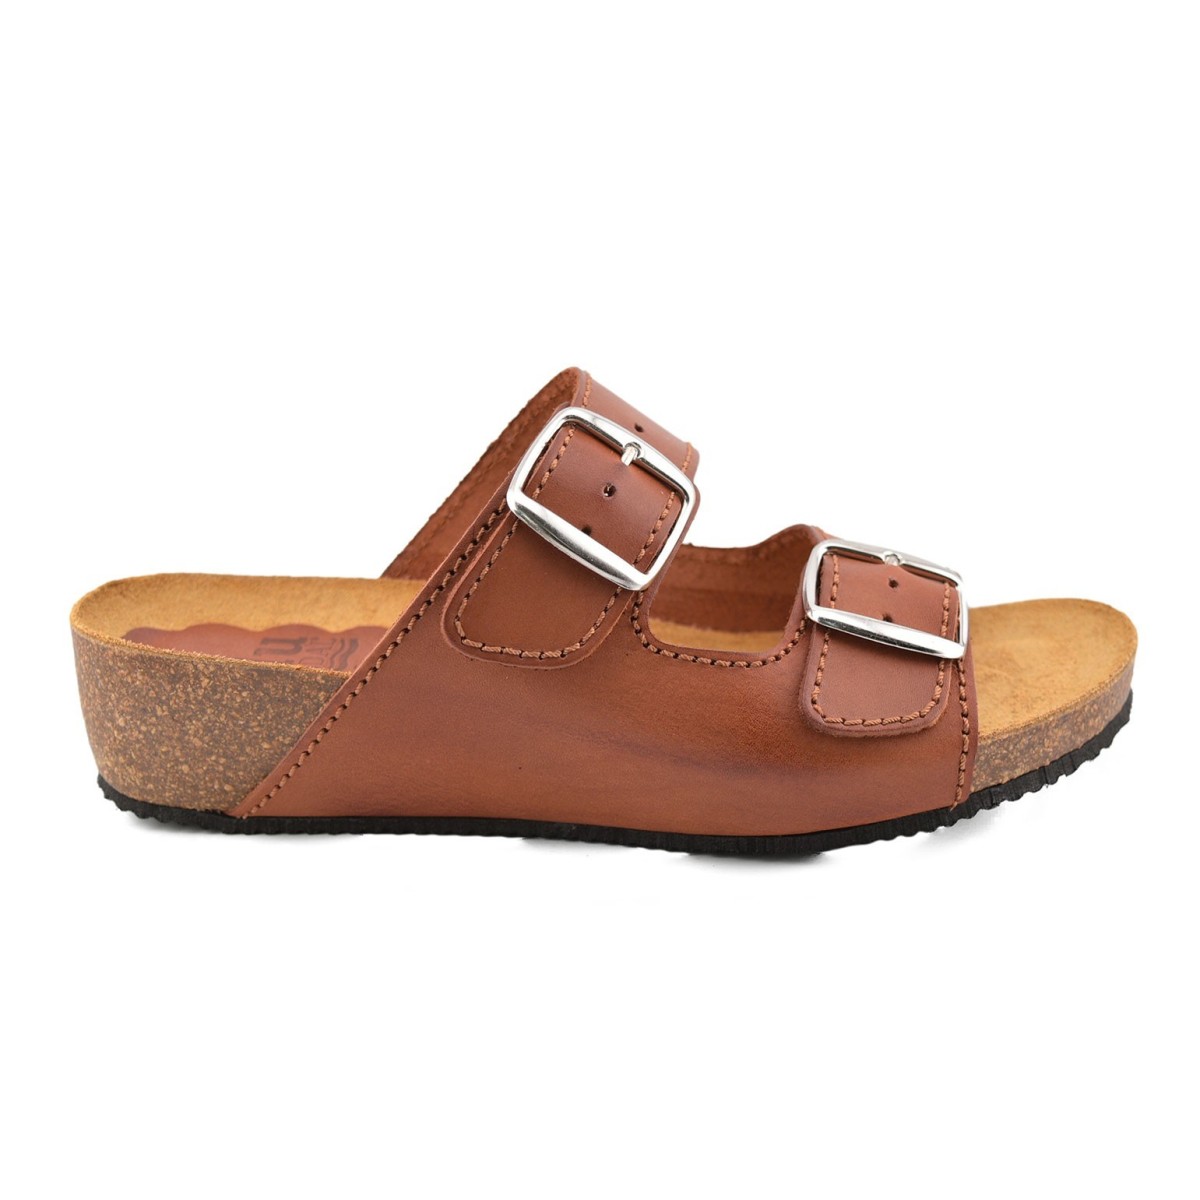 Bio brown leather sandals by Blusandal